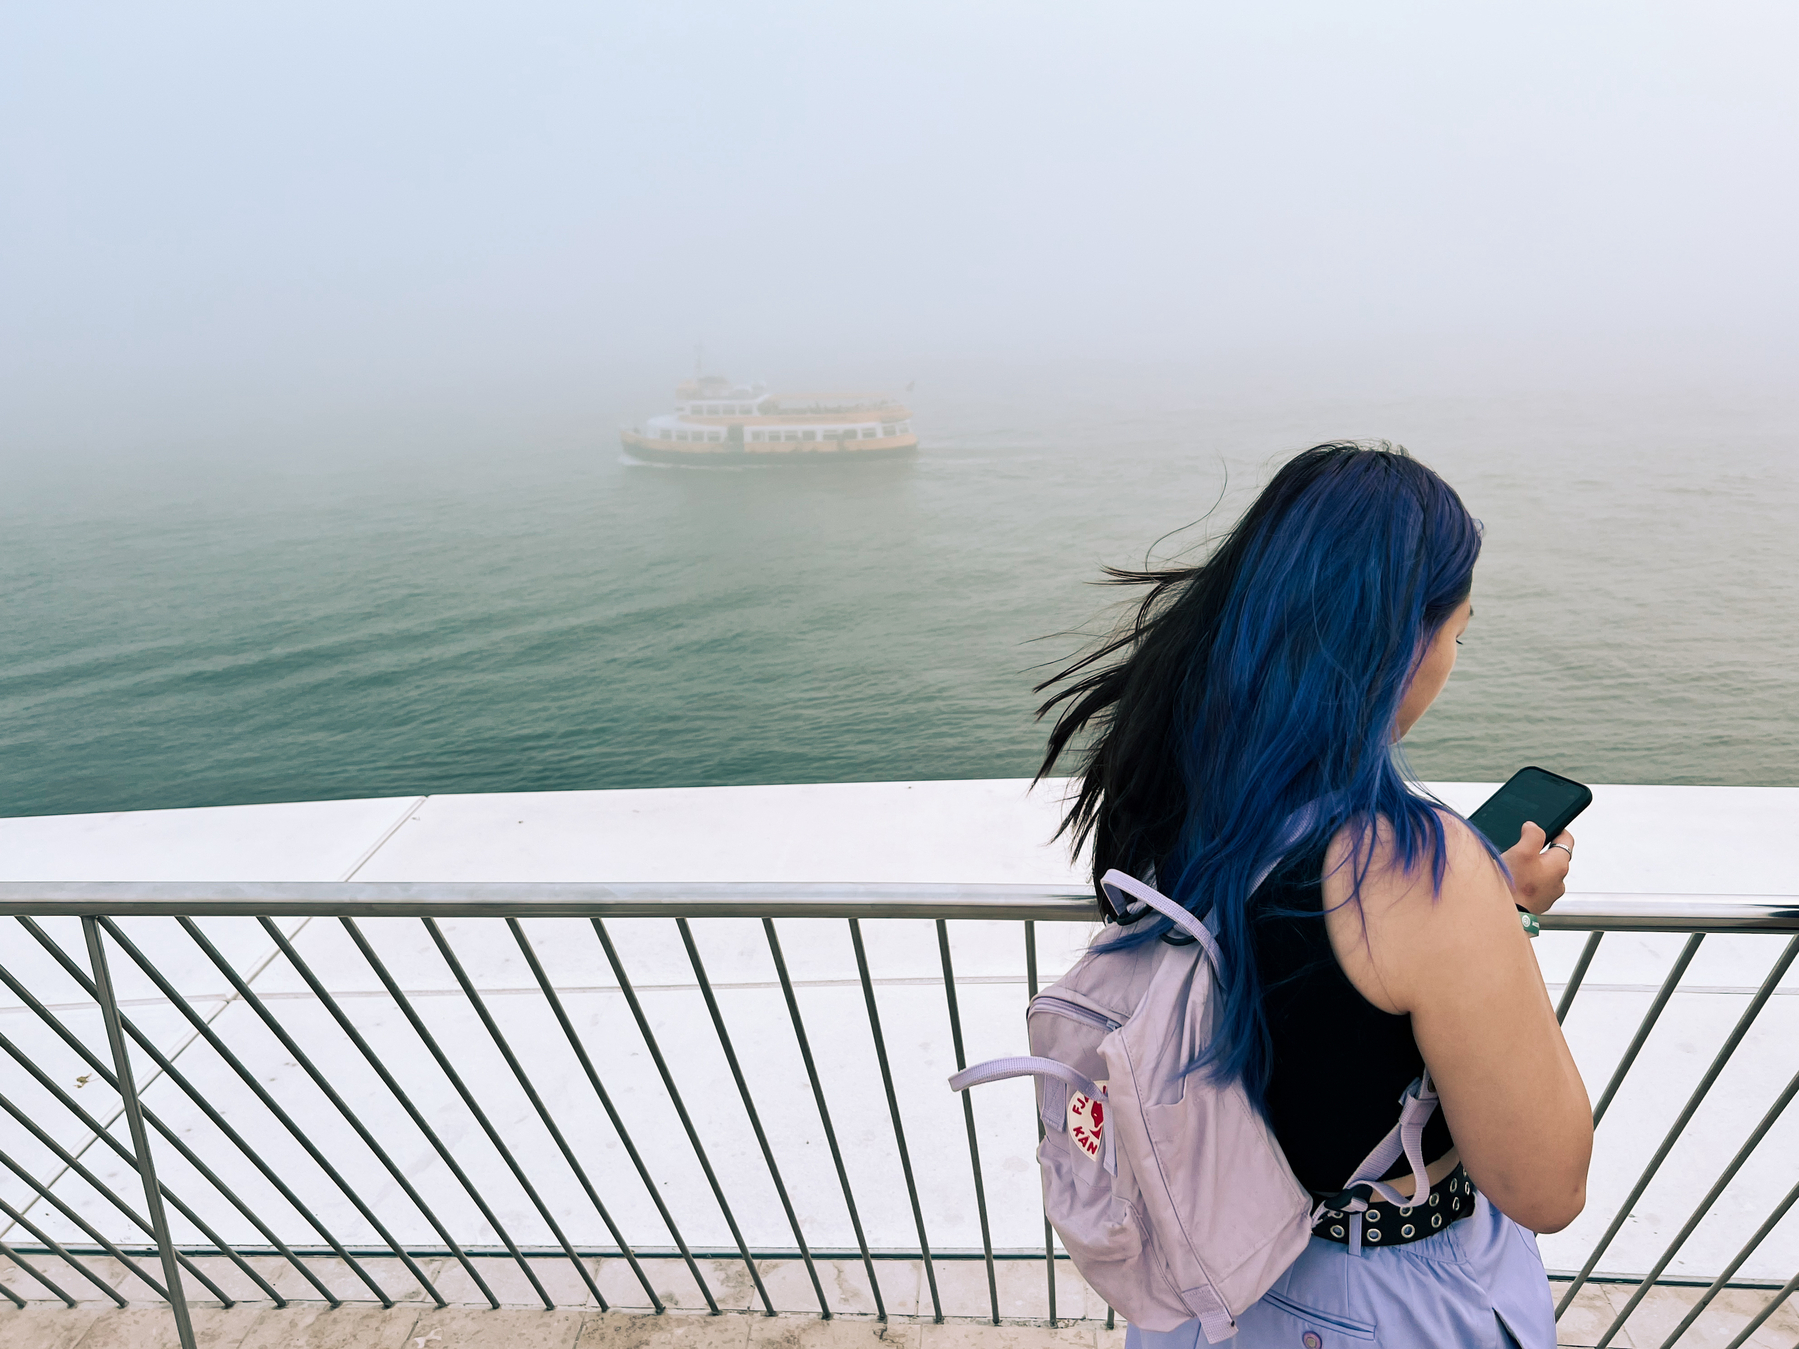 A girl checks her phone, while a ferry sails by. Foggy. 